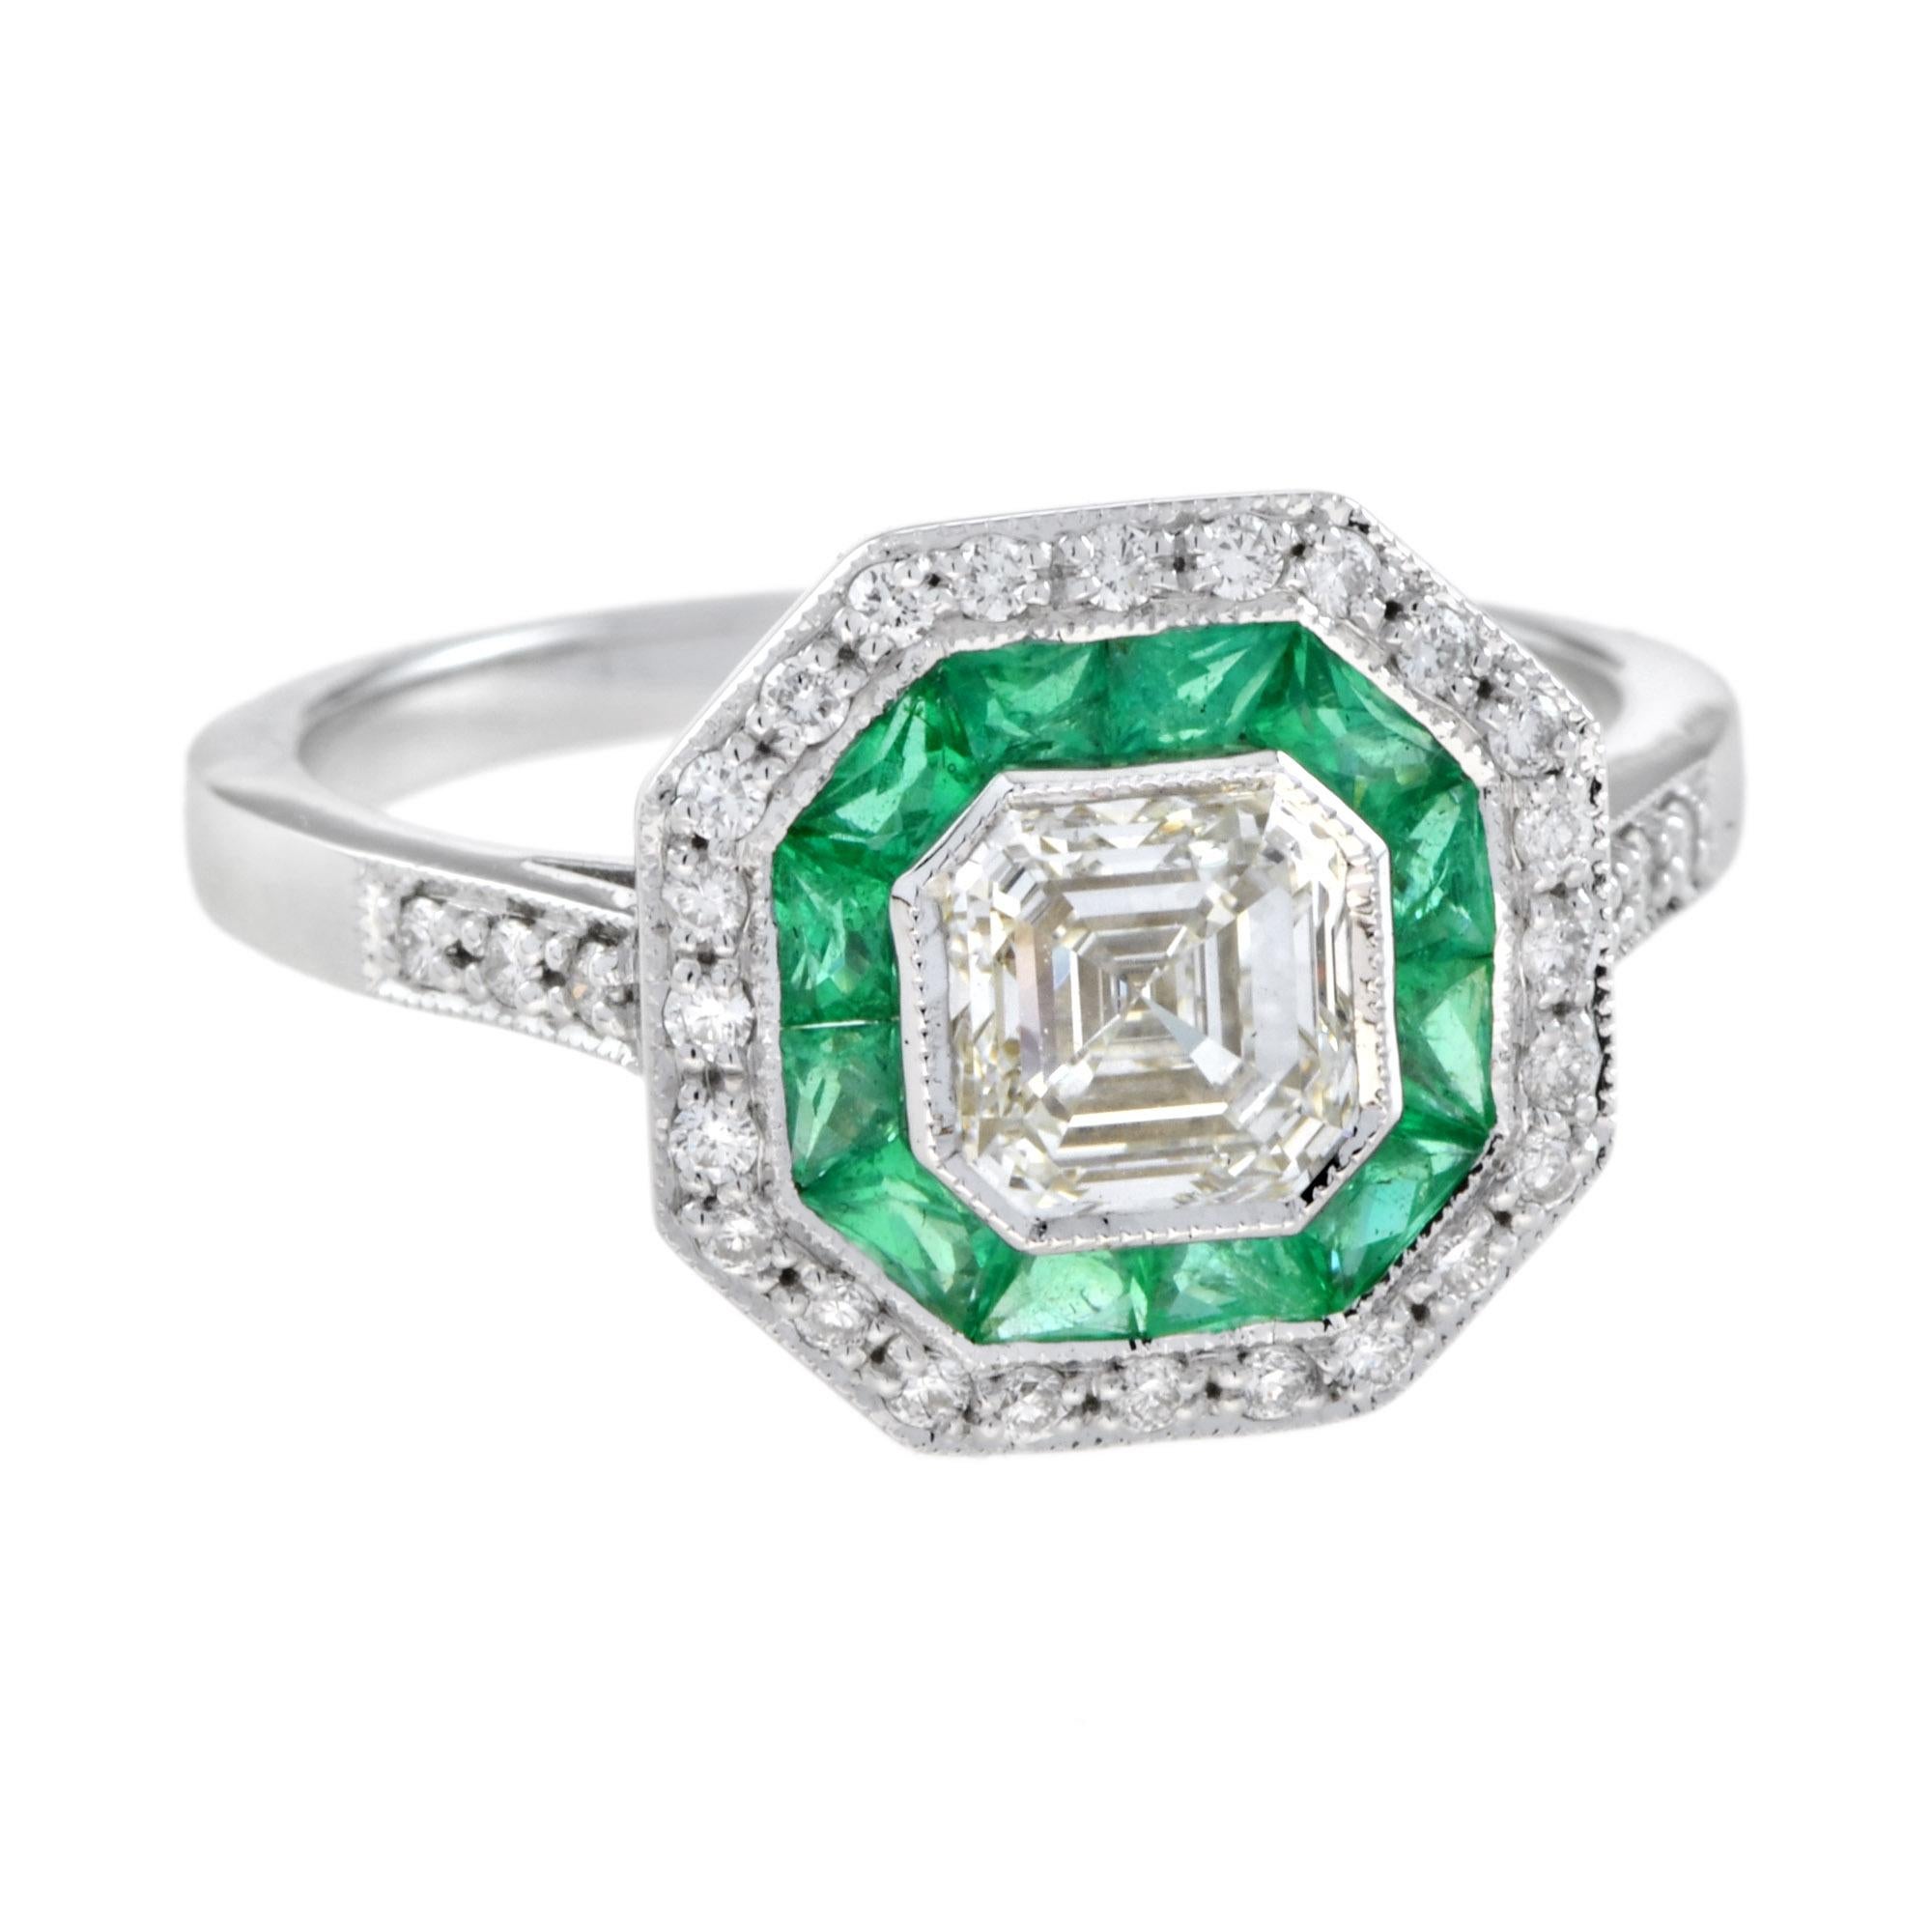 Women's Art Deco Style Asscher Cut Diamond and Emerald Engagement Ring in 18K White Gold For Sale